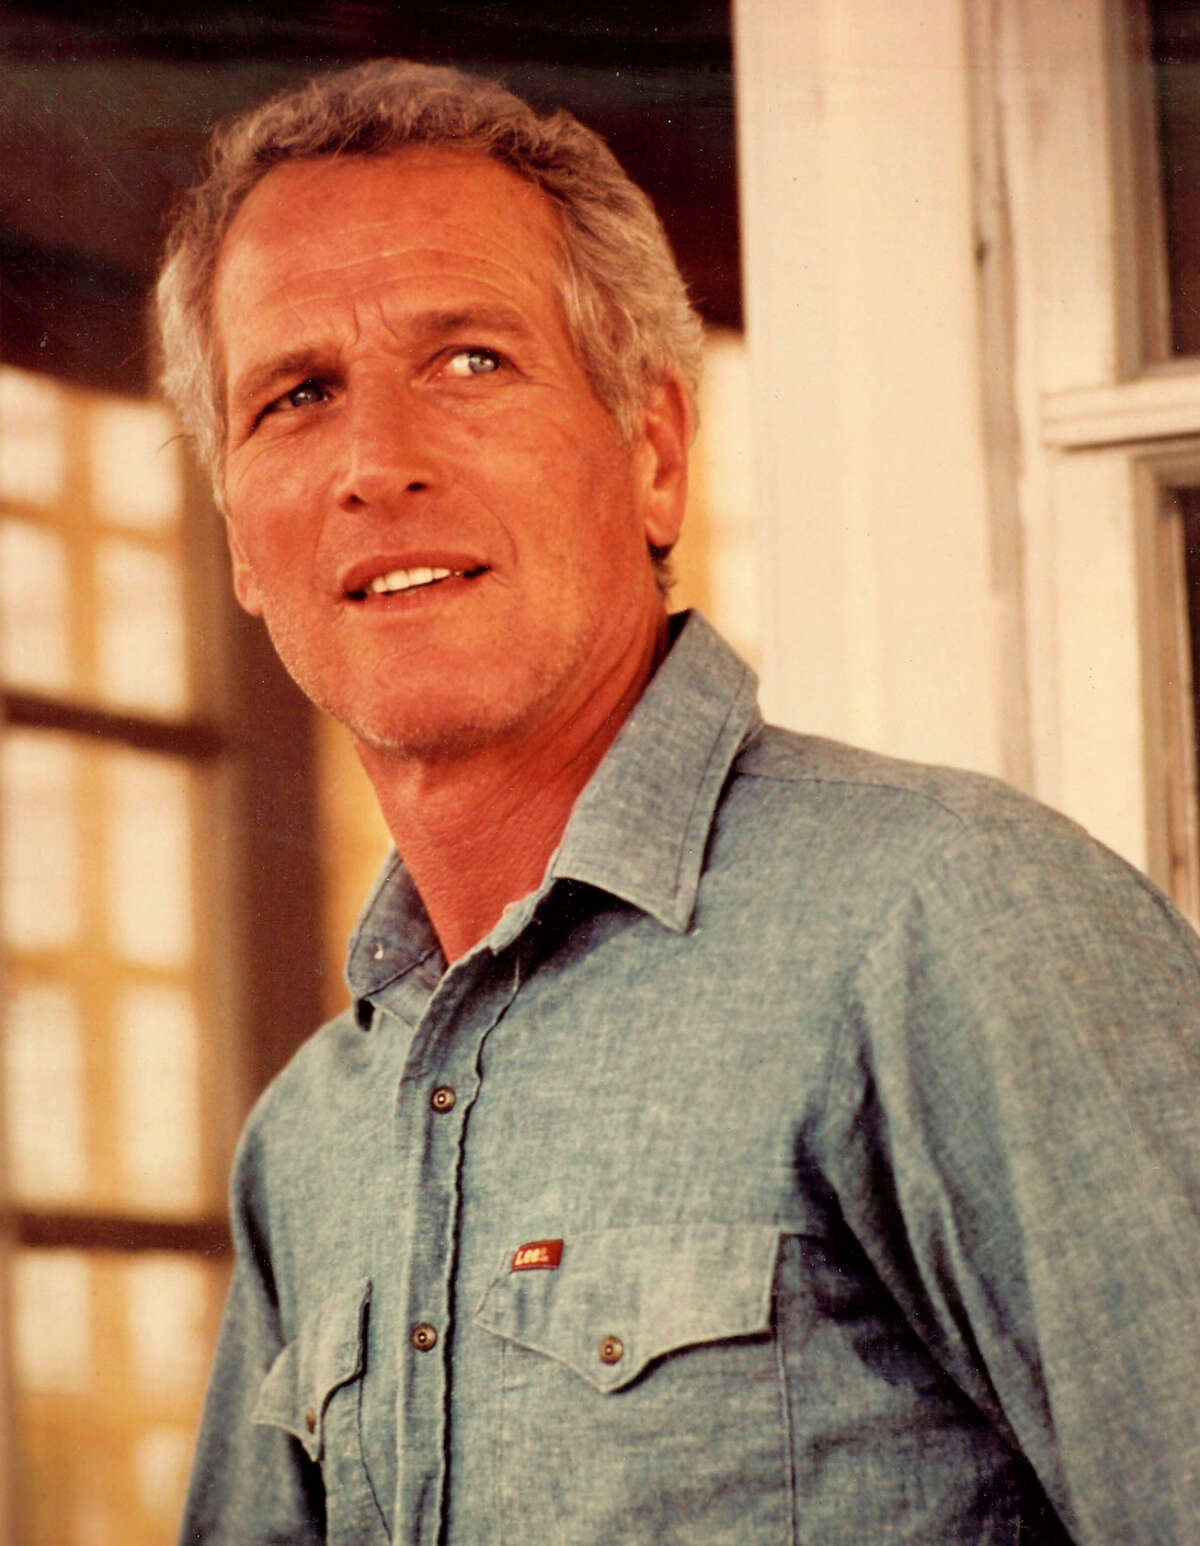 Paul Newman Before he turned his talent to salad dressing, Paul Newman served in the U.S. Navy in World War II as a turret gunner. Colorblindness disqualified him as a pilot.